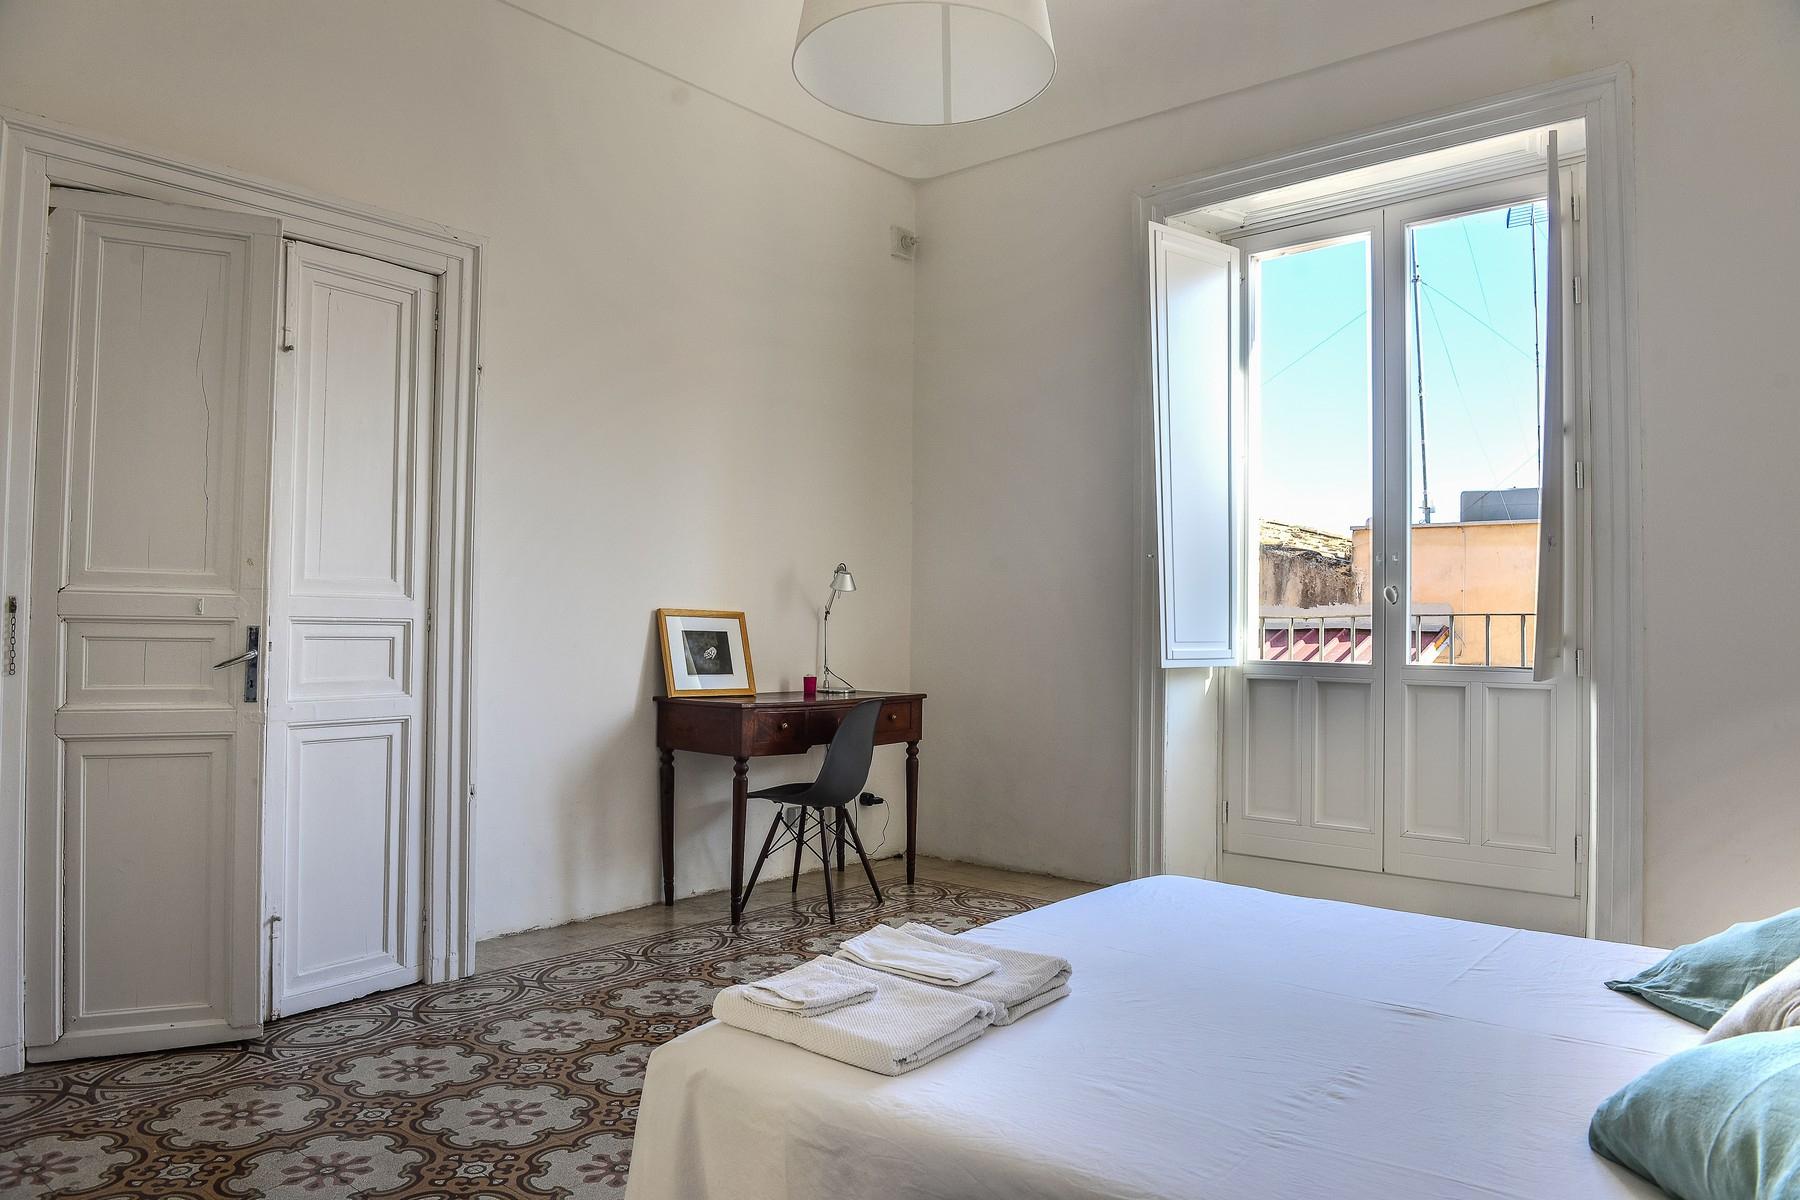 Renovated apartments with the original floors in Noto - 24